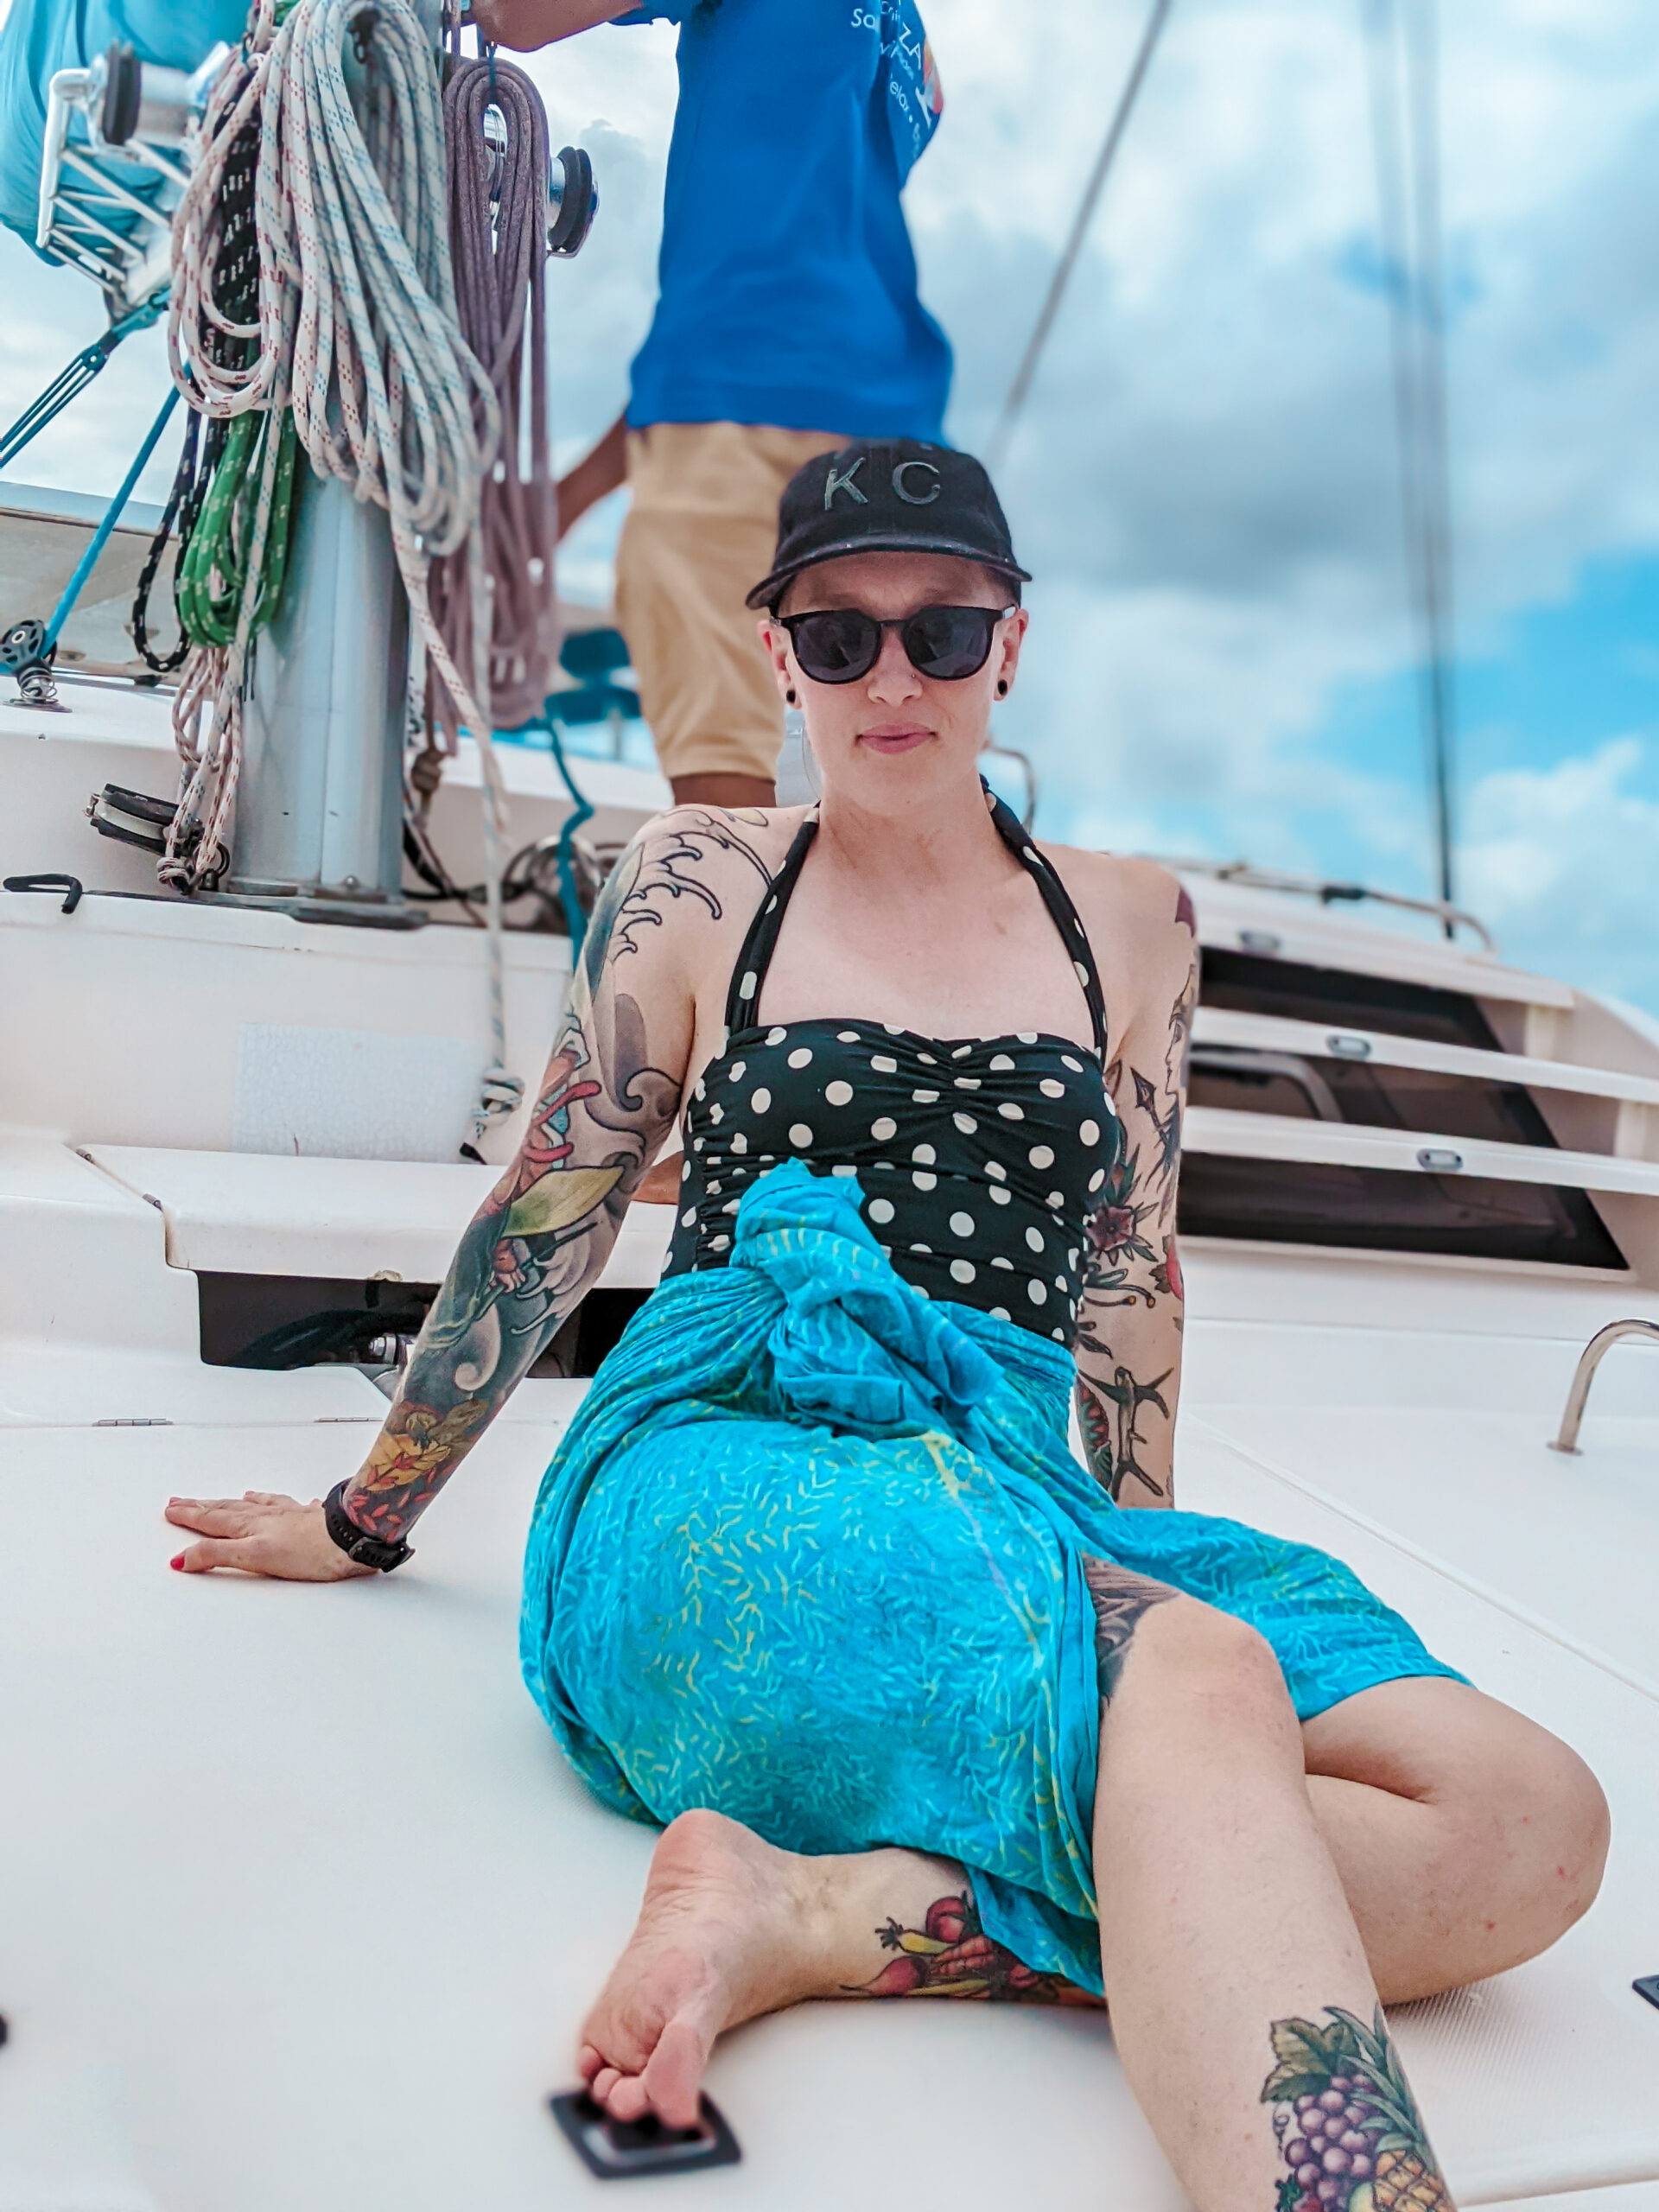 Heather Physioc, photographer and writer from KCTRVLR, on a catamaran cruise near the Caribbean ocean off the coast of Barbados